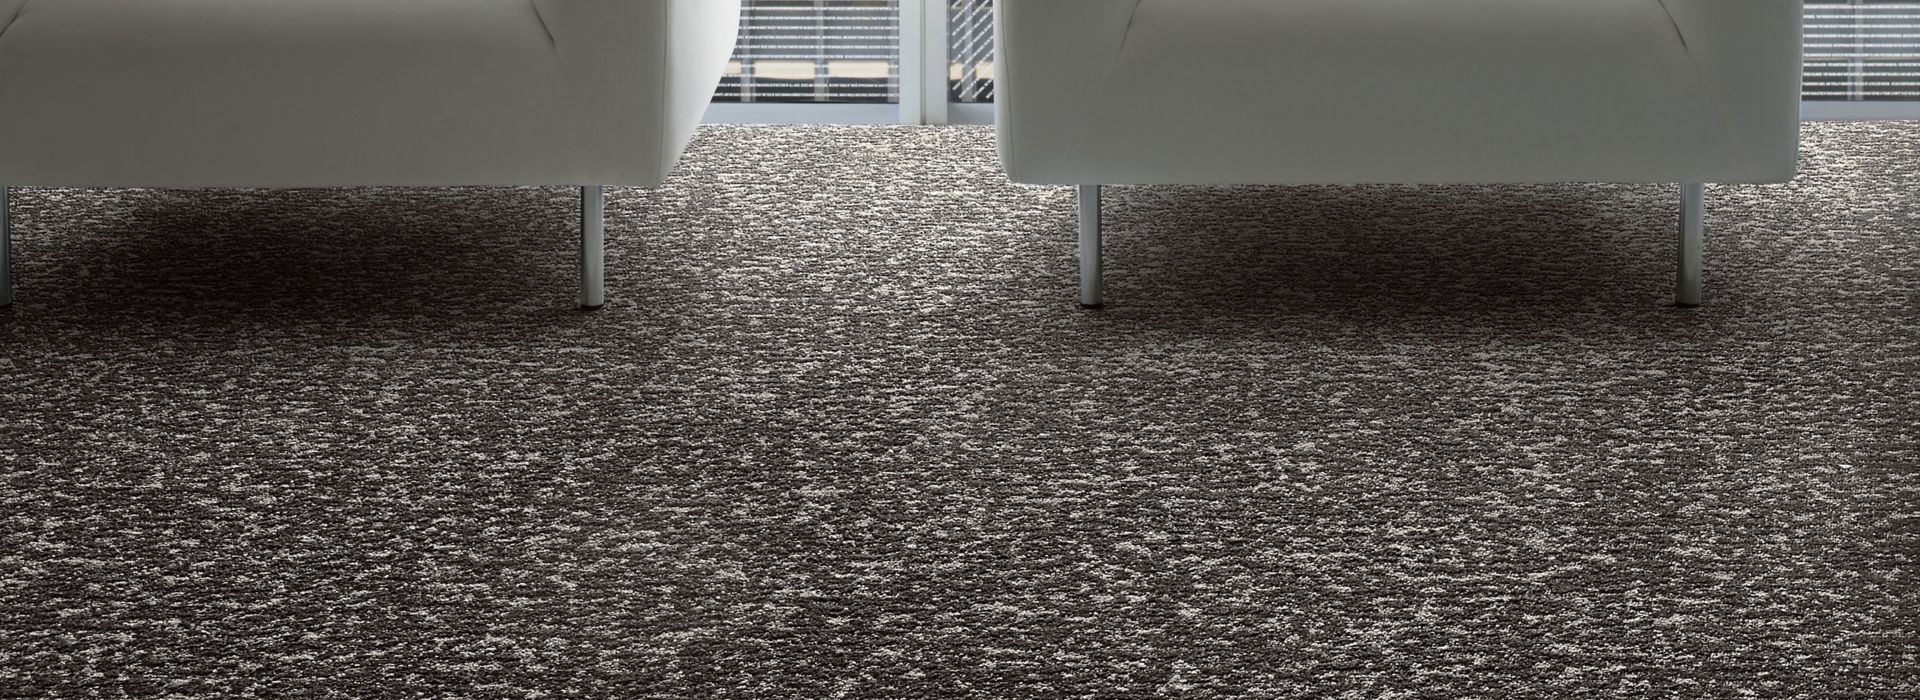 Interface Vessel square carpet tile with chairs in front of window imagen número 1